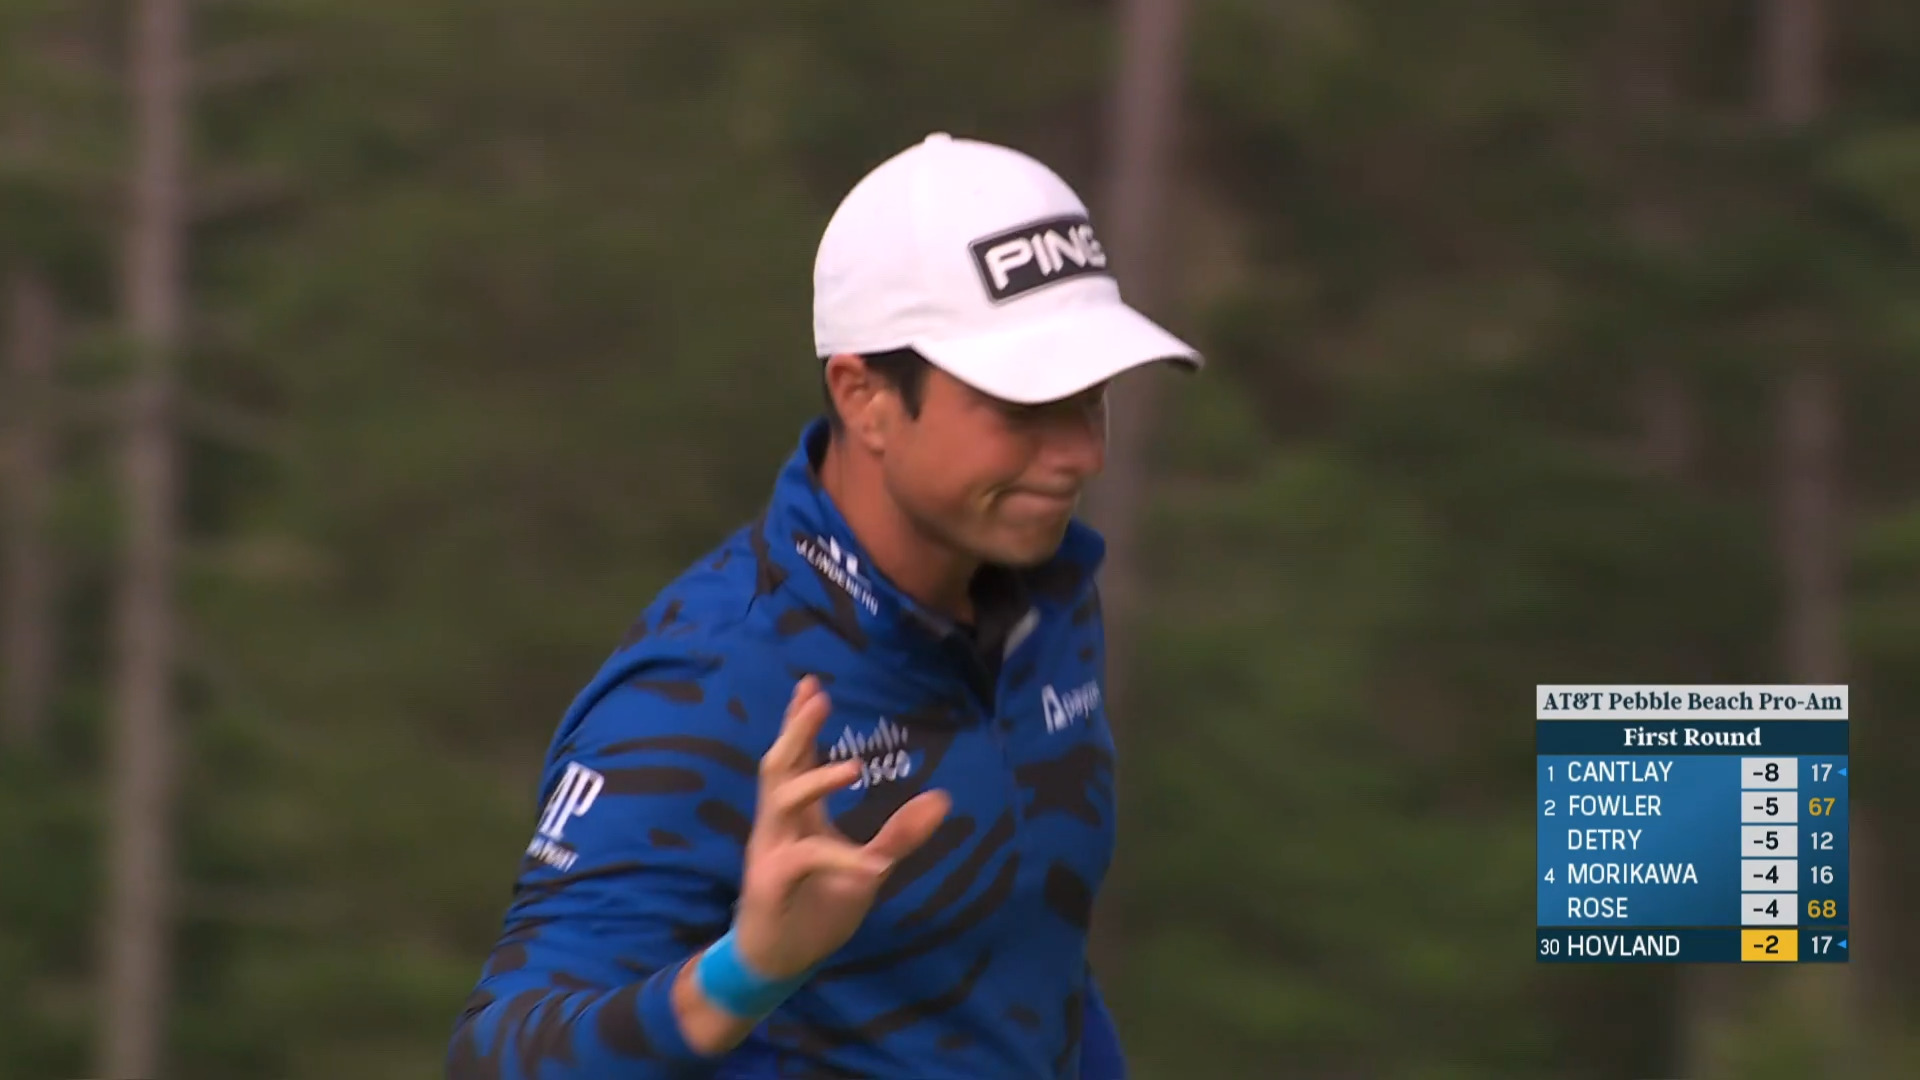 Viktor Hovland holes long putt for birdie at AT&T Pebble Beach